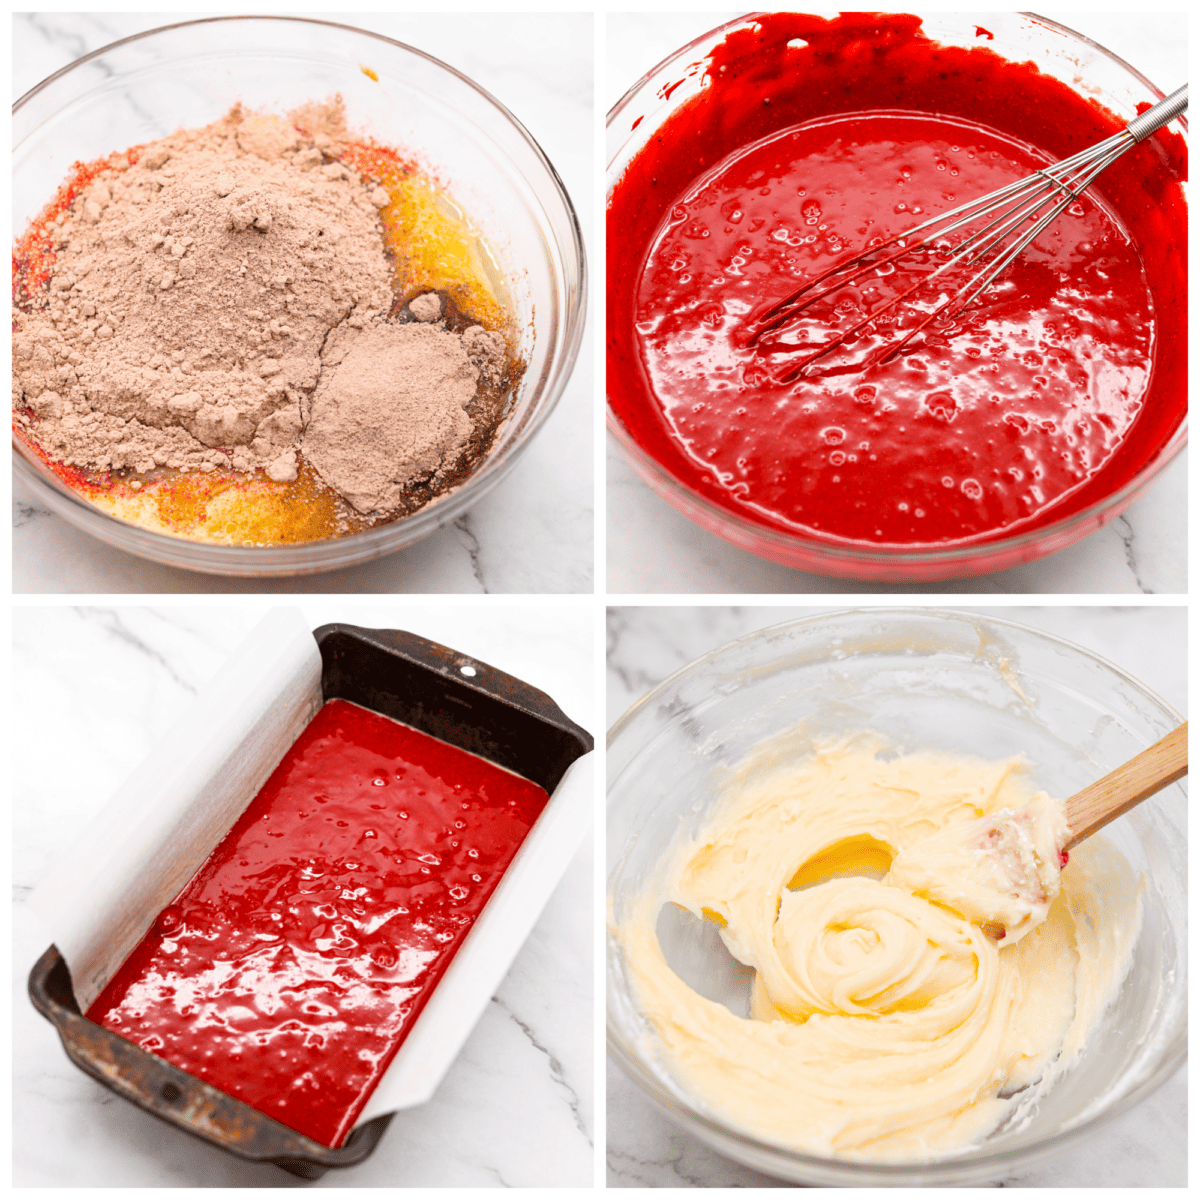 First photo of the cake mix, pudding, and wet ingredients added to a large bowl. Second photo of the batter mixed with a whisk. Third photo of the batter in a loaf pan. Fourth photo of the cream cheese glaze.